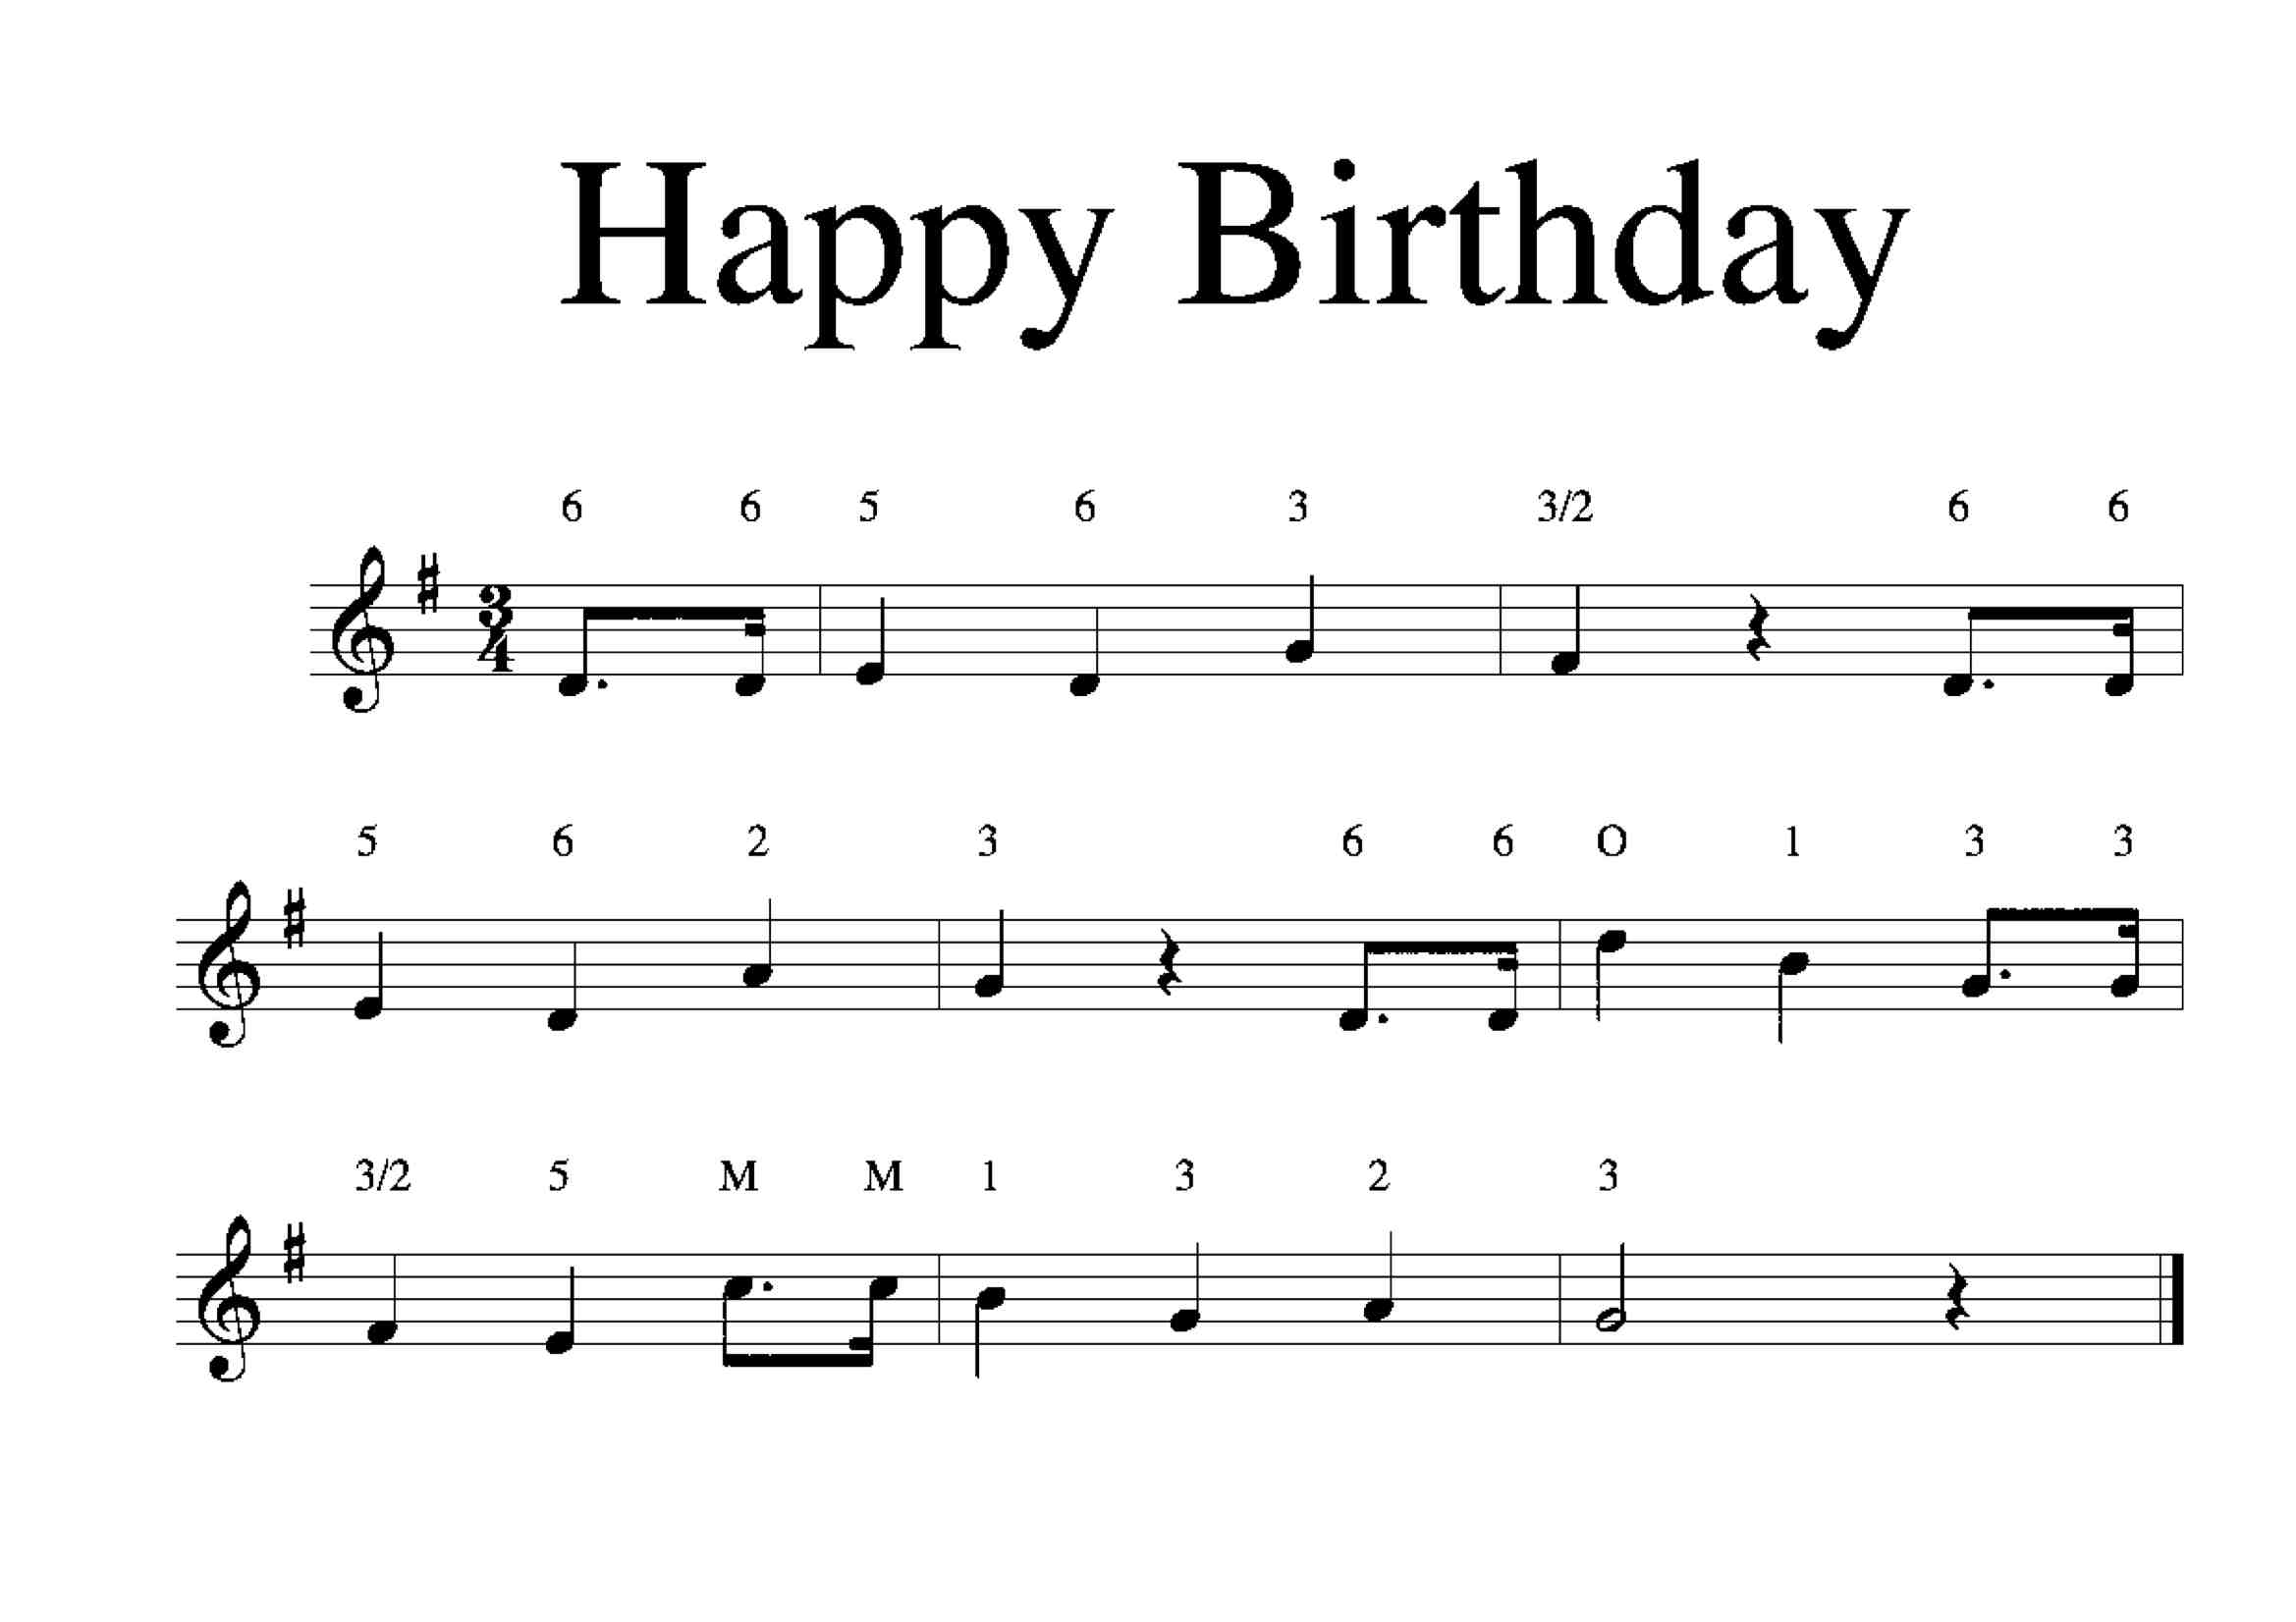 How To Make A Happy Birthday Song Tune Using Tinkerca - vrogue.co